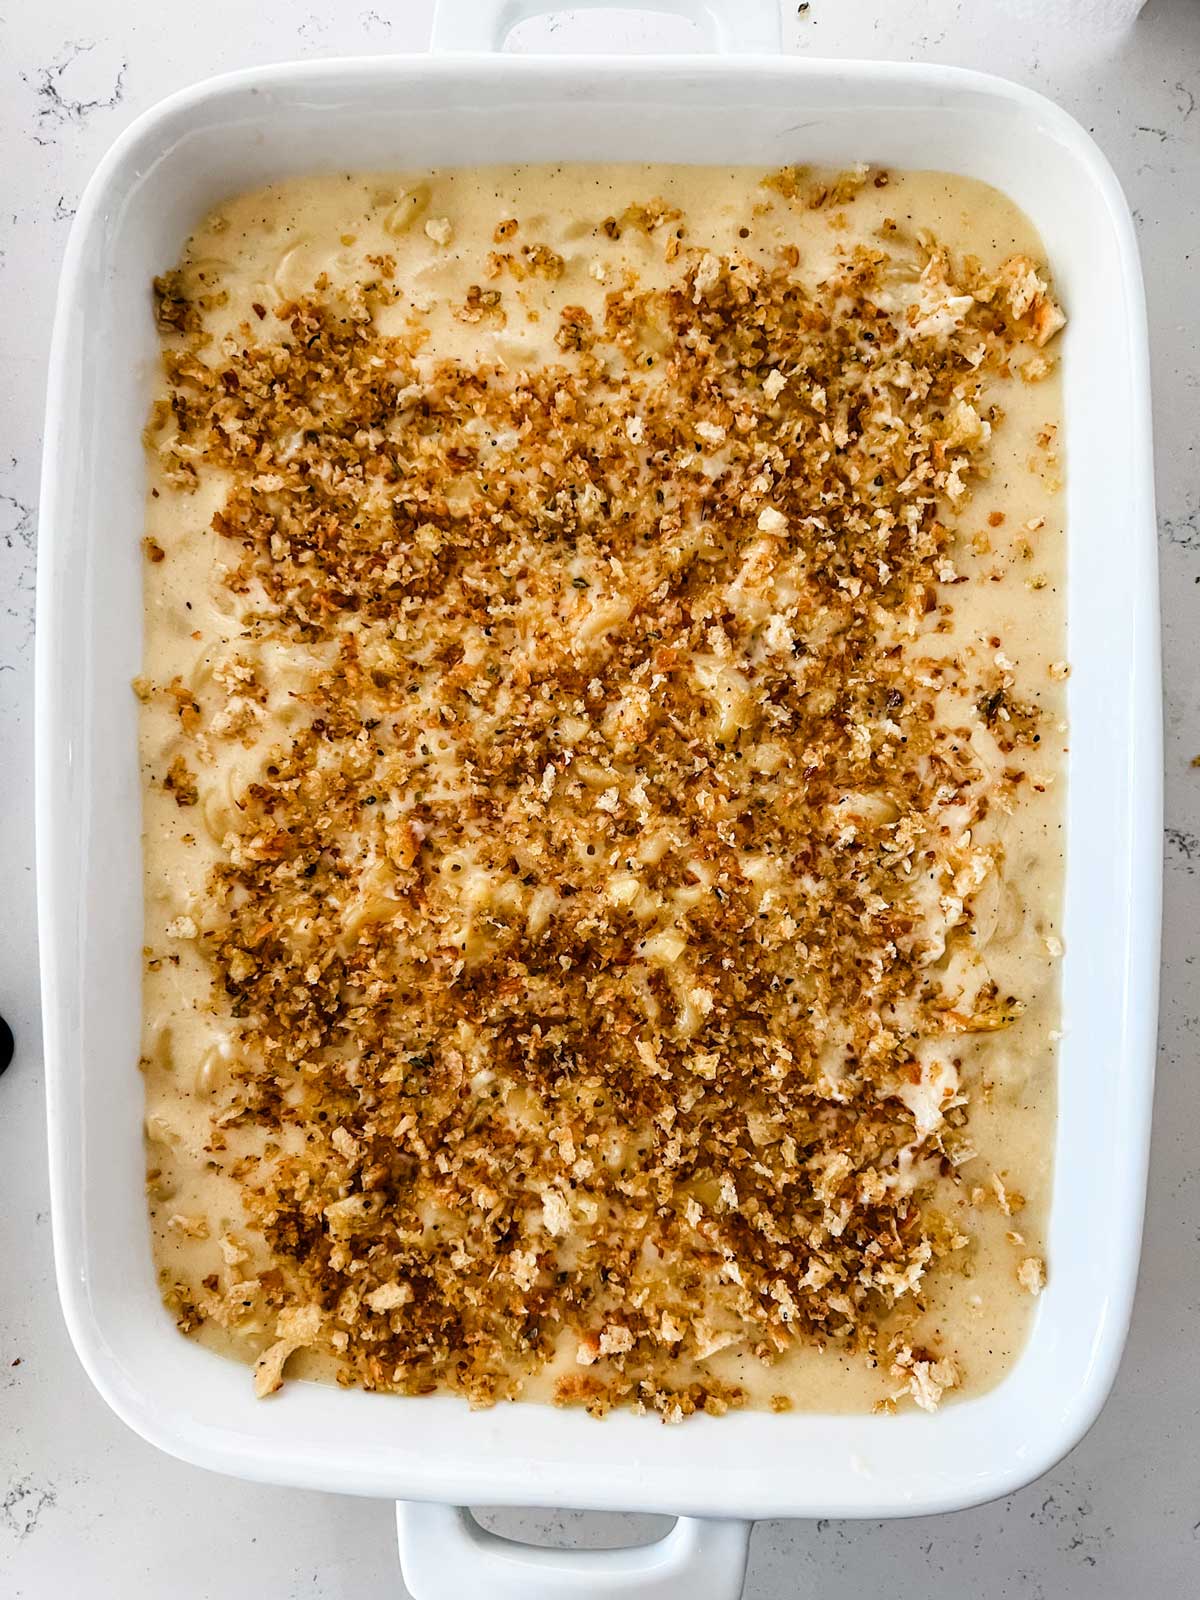 Breadcrumbs sprinkled on top of a white cheddar mach and cheese ready for the oven.